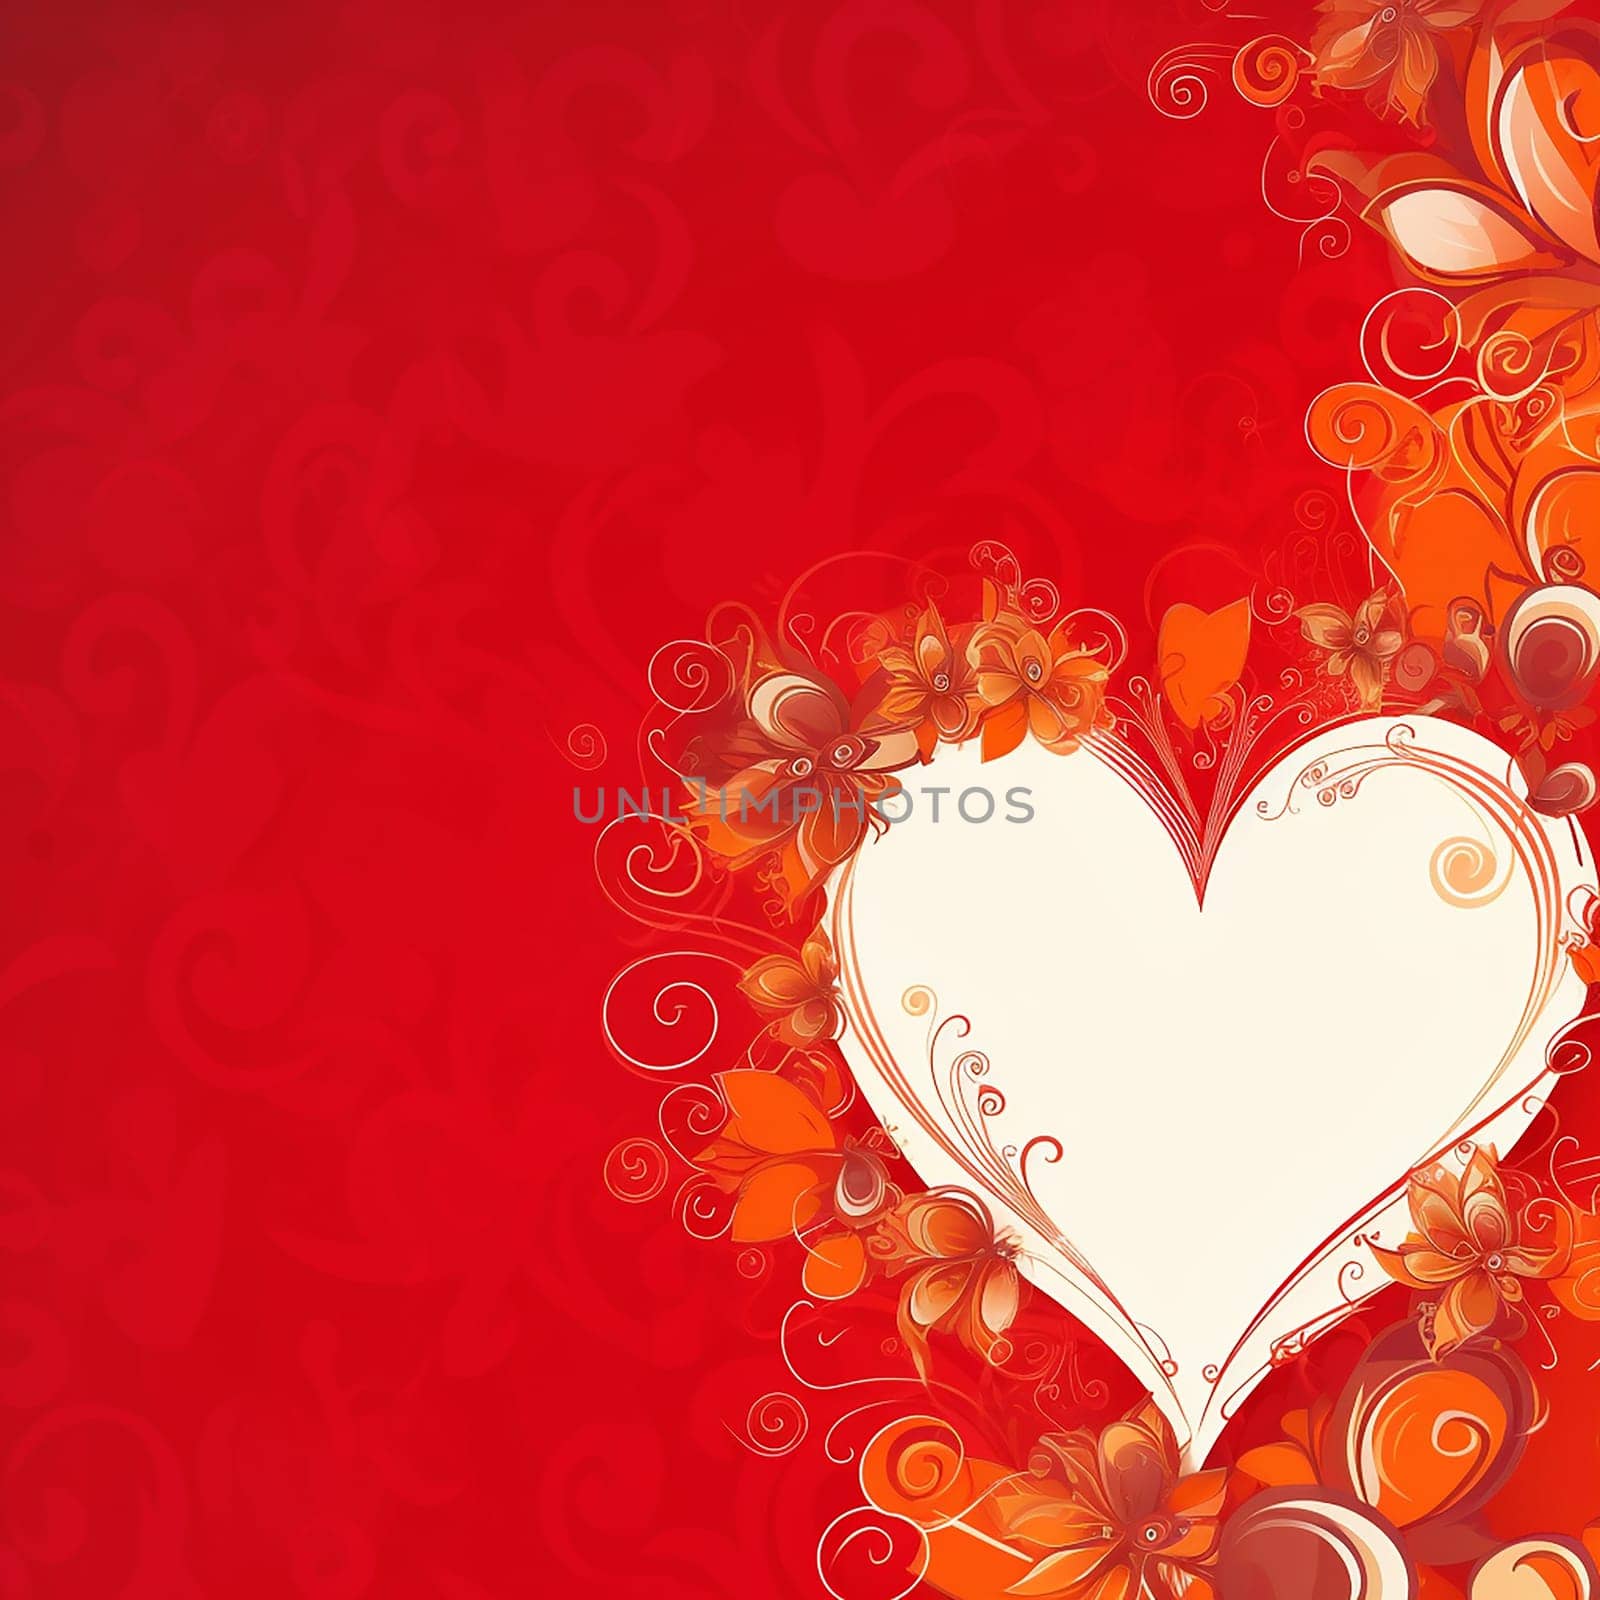 Illustration of a stylized white heart on a red background with orange floral elements. by Hype2art